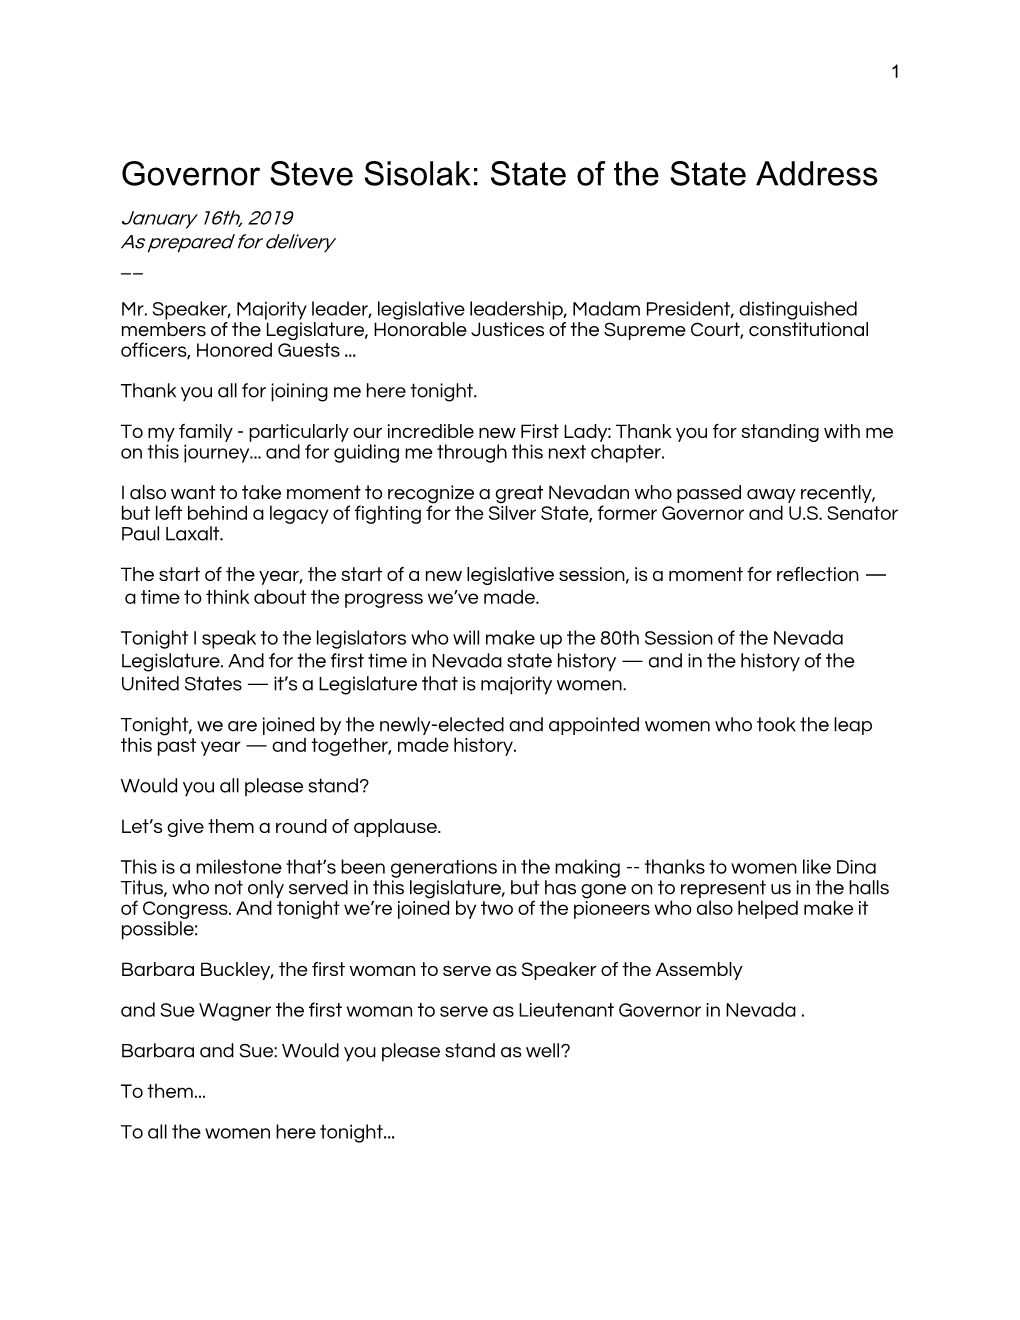 Governor Steve Sisolak: State of the State Address (2019)